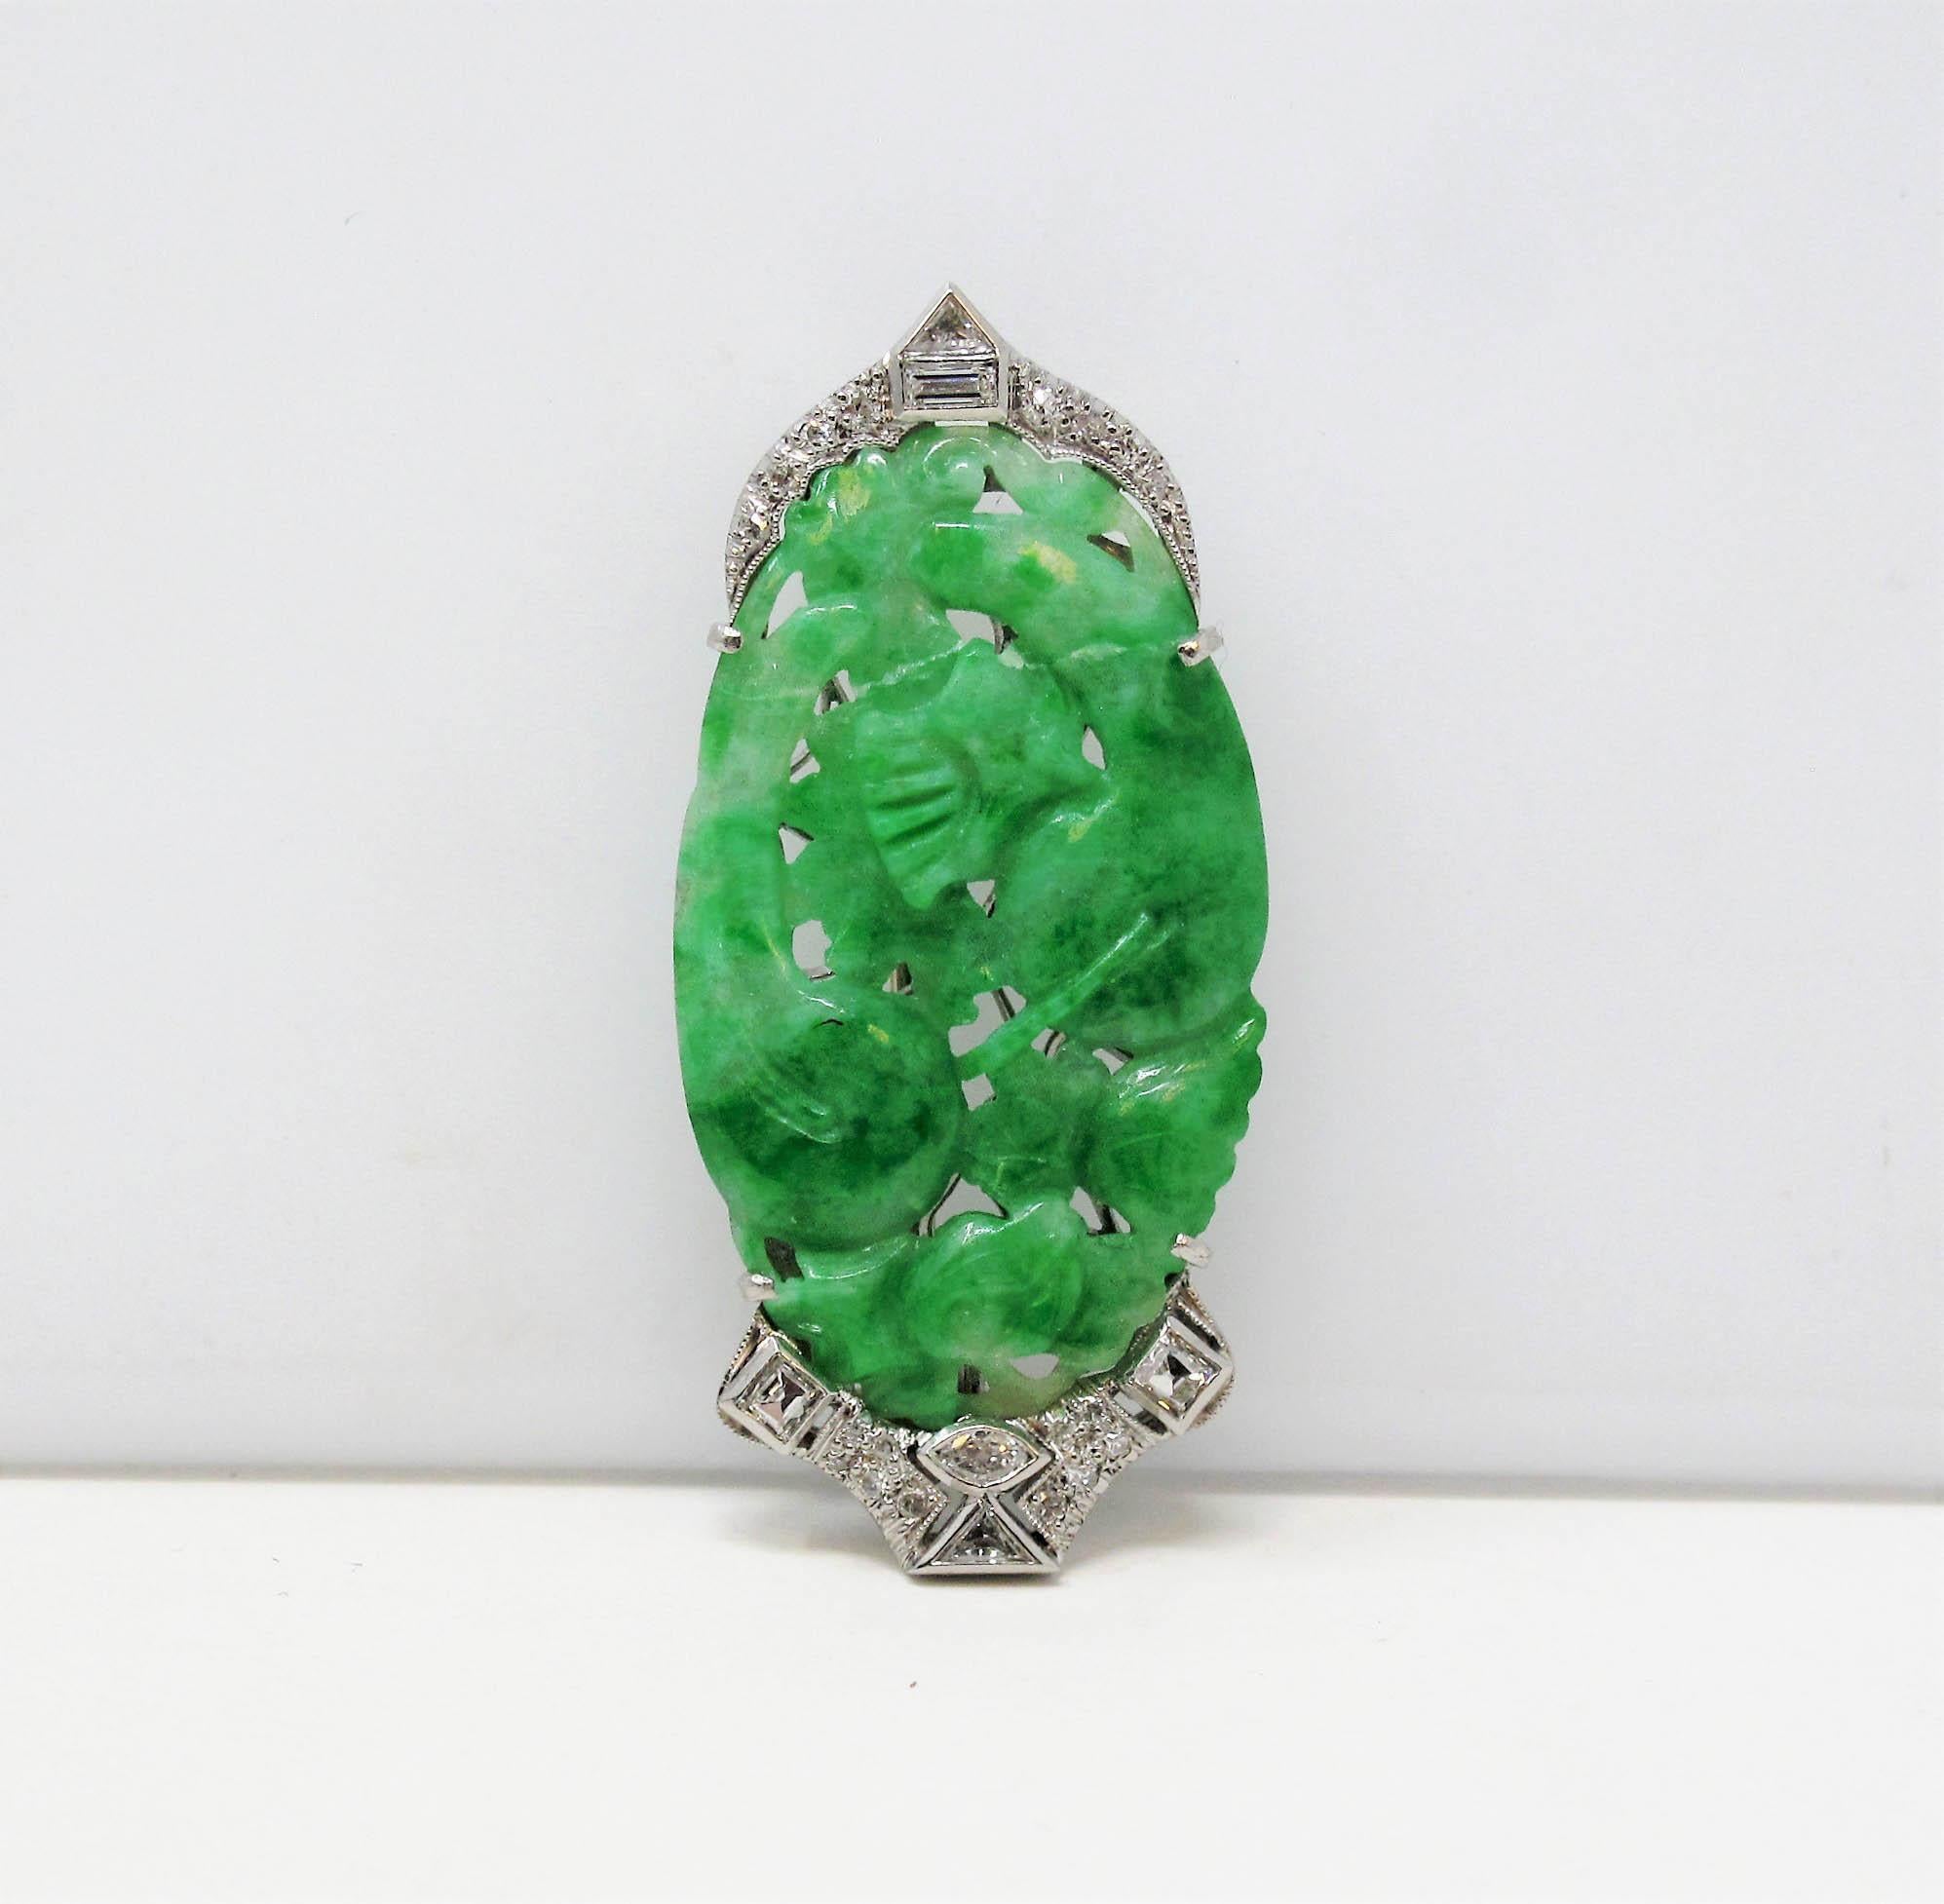 Vintage Carved Moss in Snow Jadeite Jade Brooch with Diamond Accents in Platinum In Fair Condition For Sale In Scottsdale, AZ